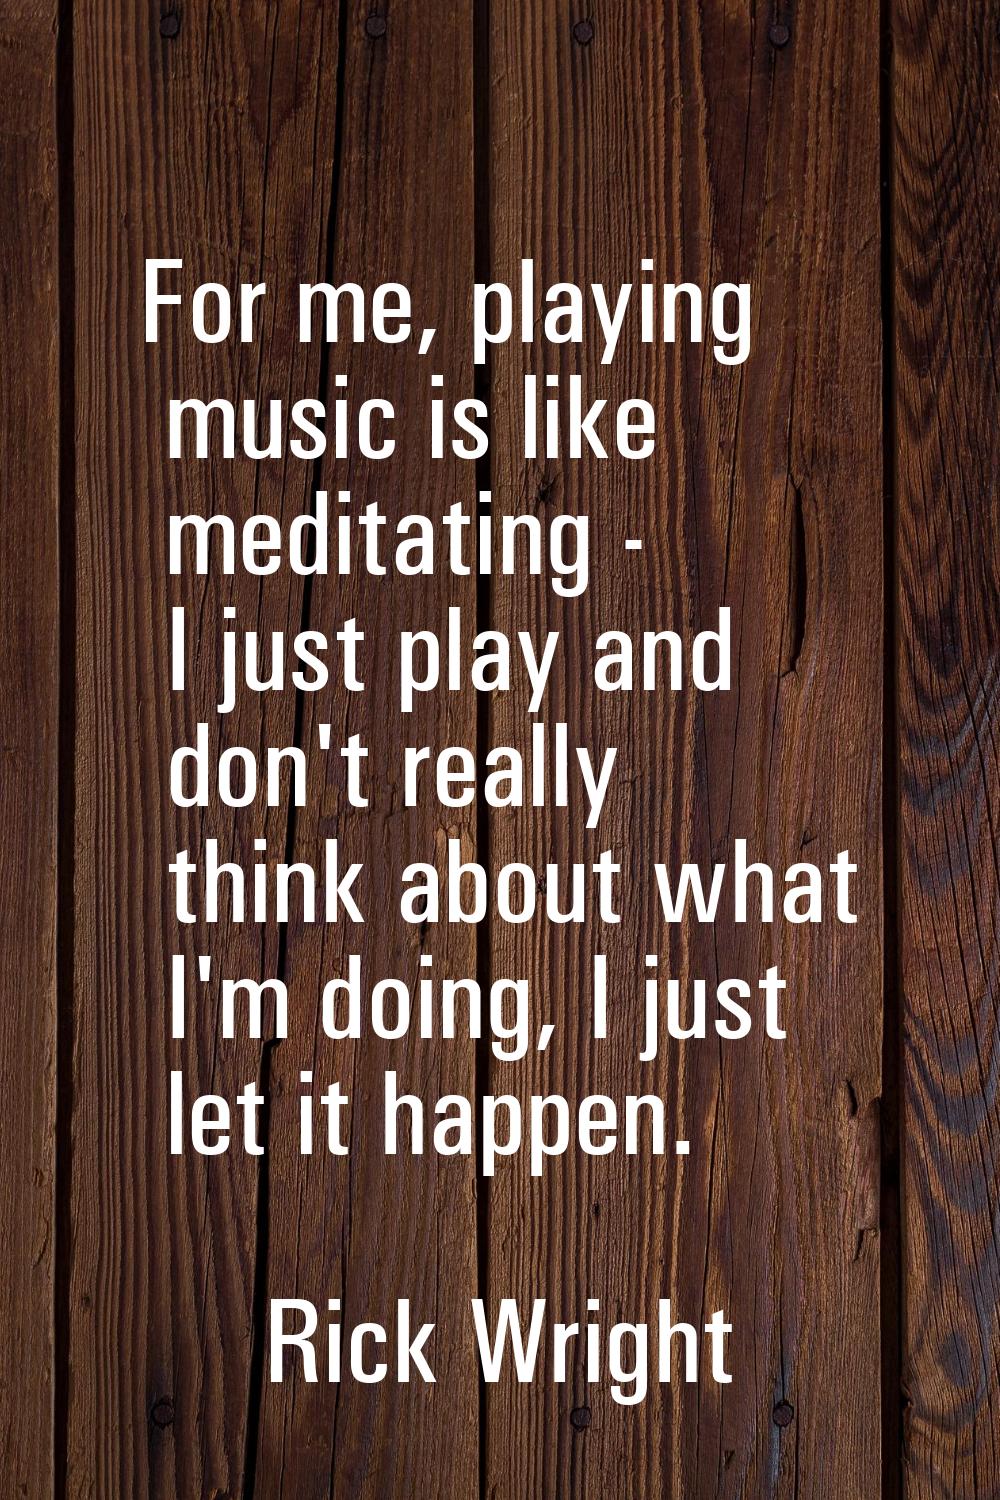 For me, playing music is like meditating - I just play and don't really think about what I'm doing,